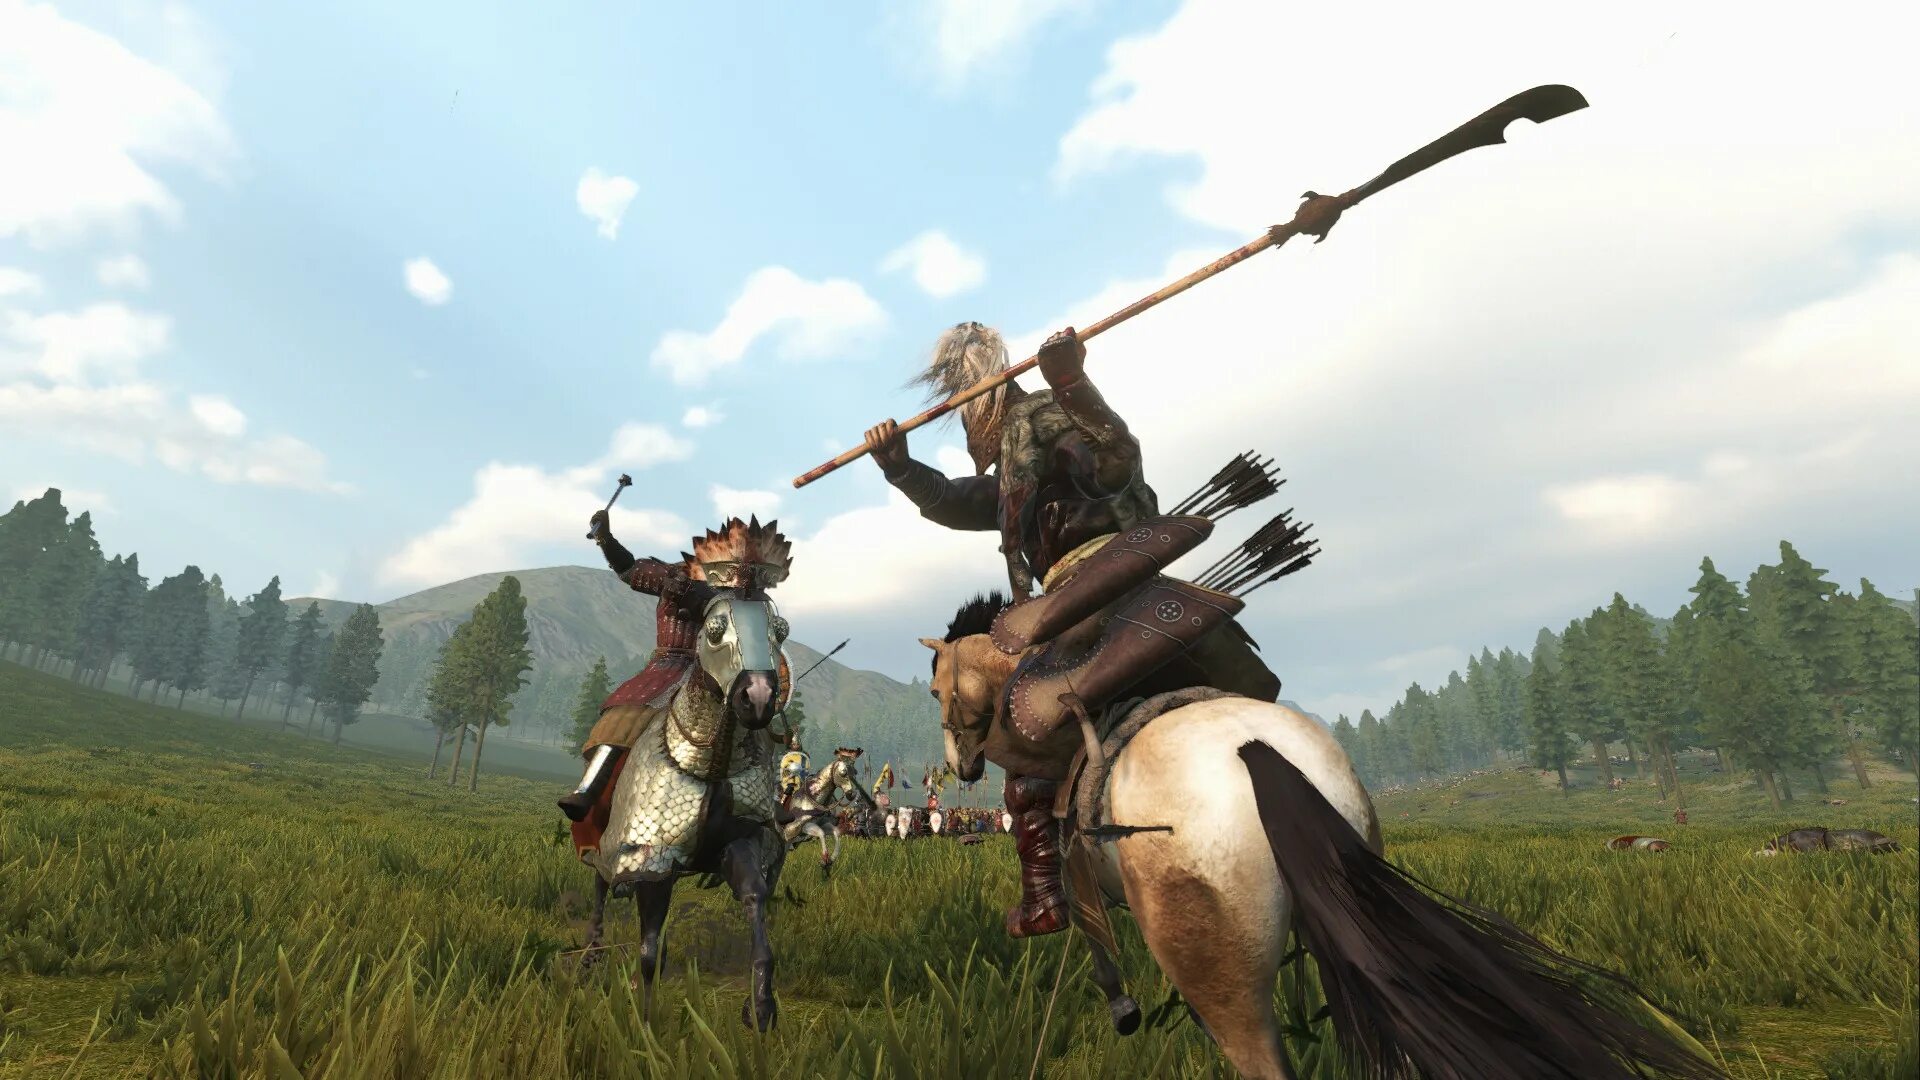 Mount and Blade 2 Bannerlord. Mount and Blade 2 Bannerlord СТУРГИЯ. Монтан блейд баннерлорд. Mount and Blade 2 Bannerlord Фалькс. Mount and blade вассал